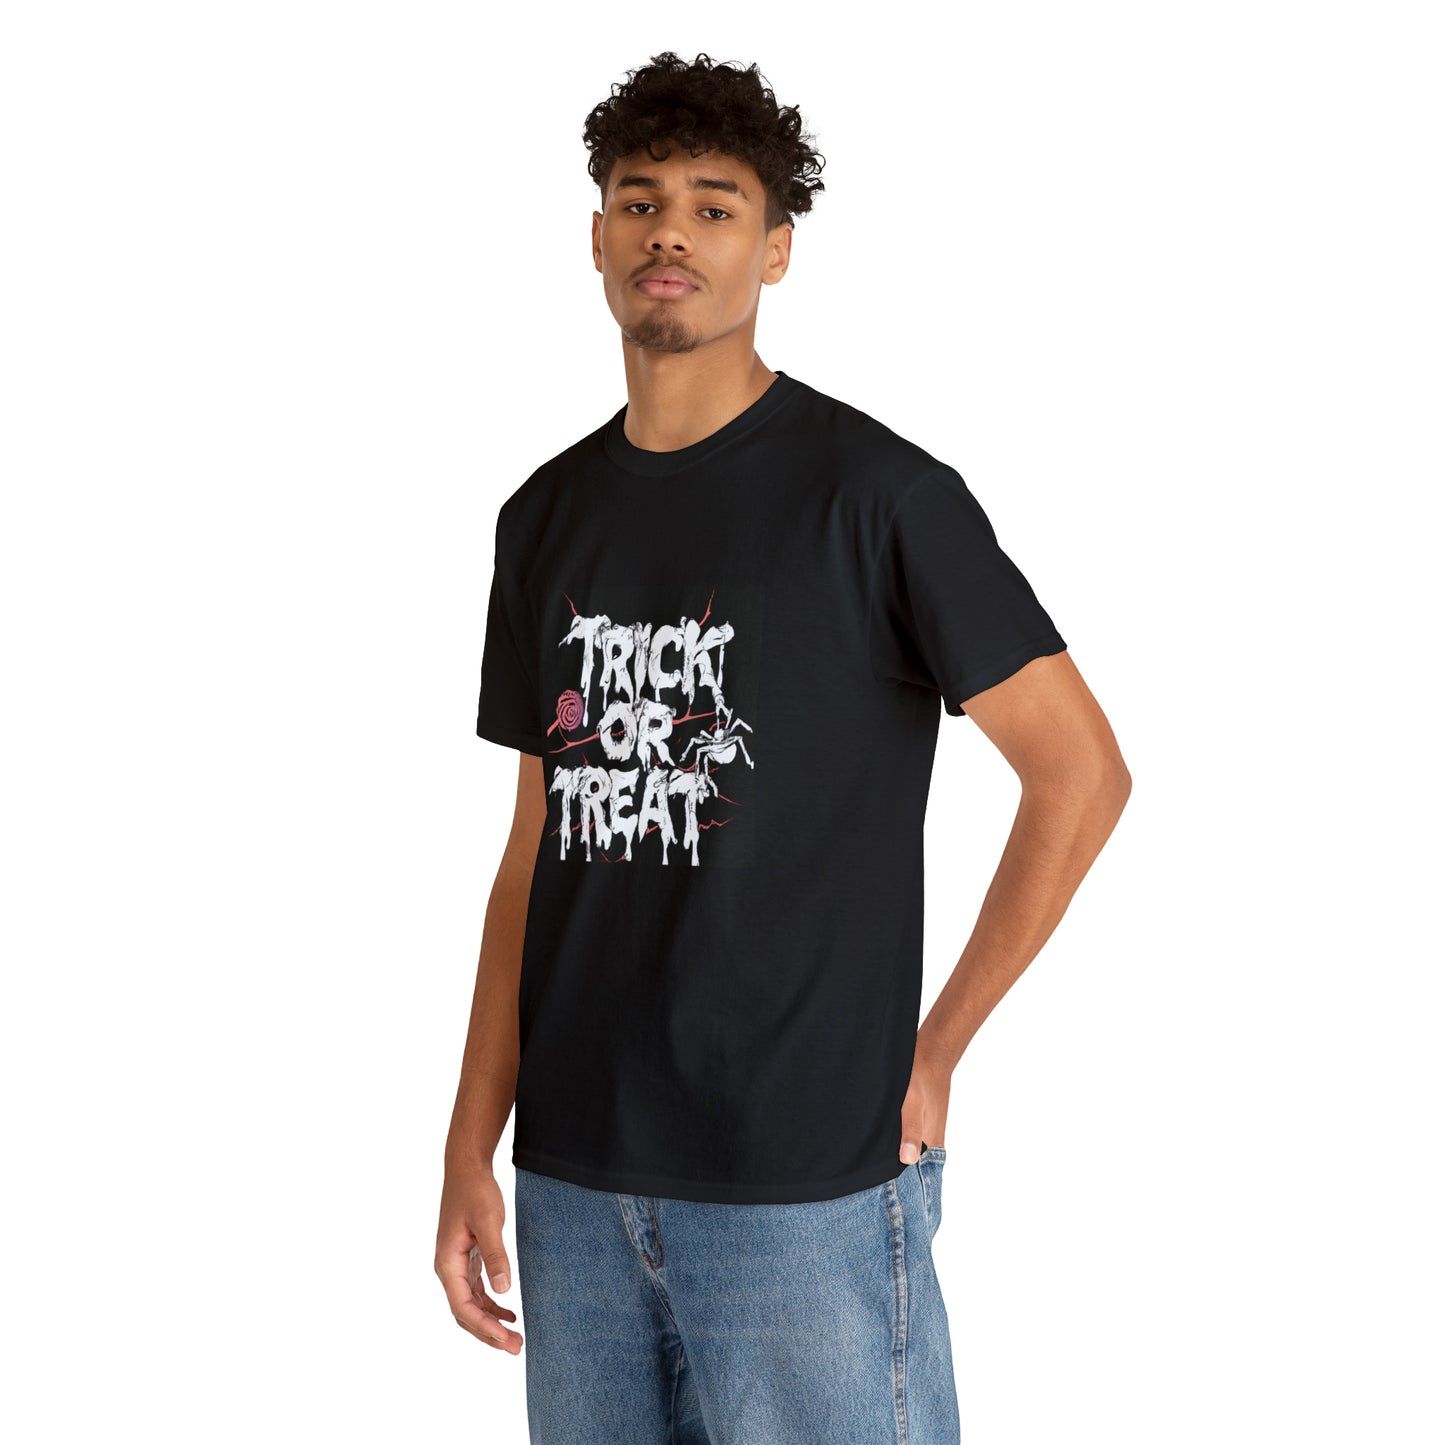 Trick or Treat Black Unisex Heavy Cotton Tee for Halloween and Fall Wardrobe